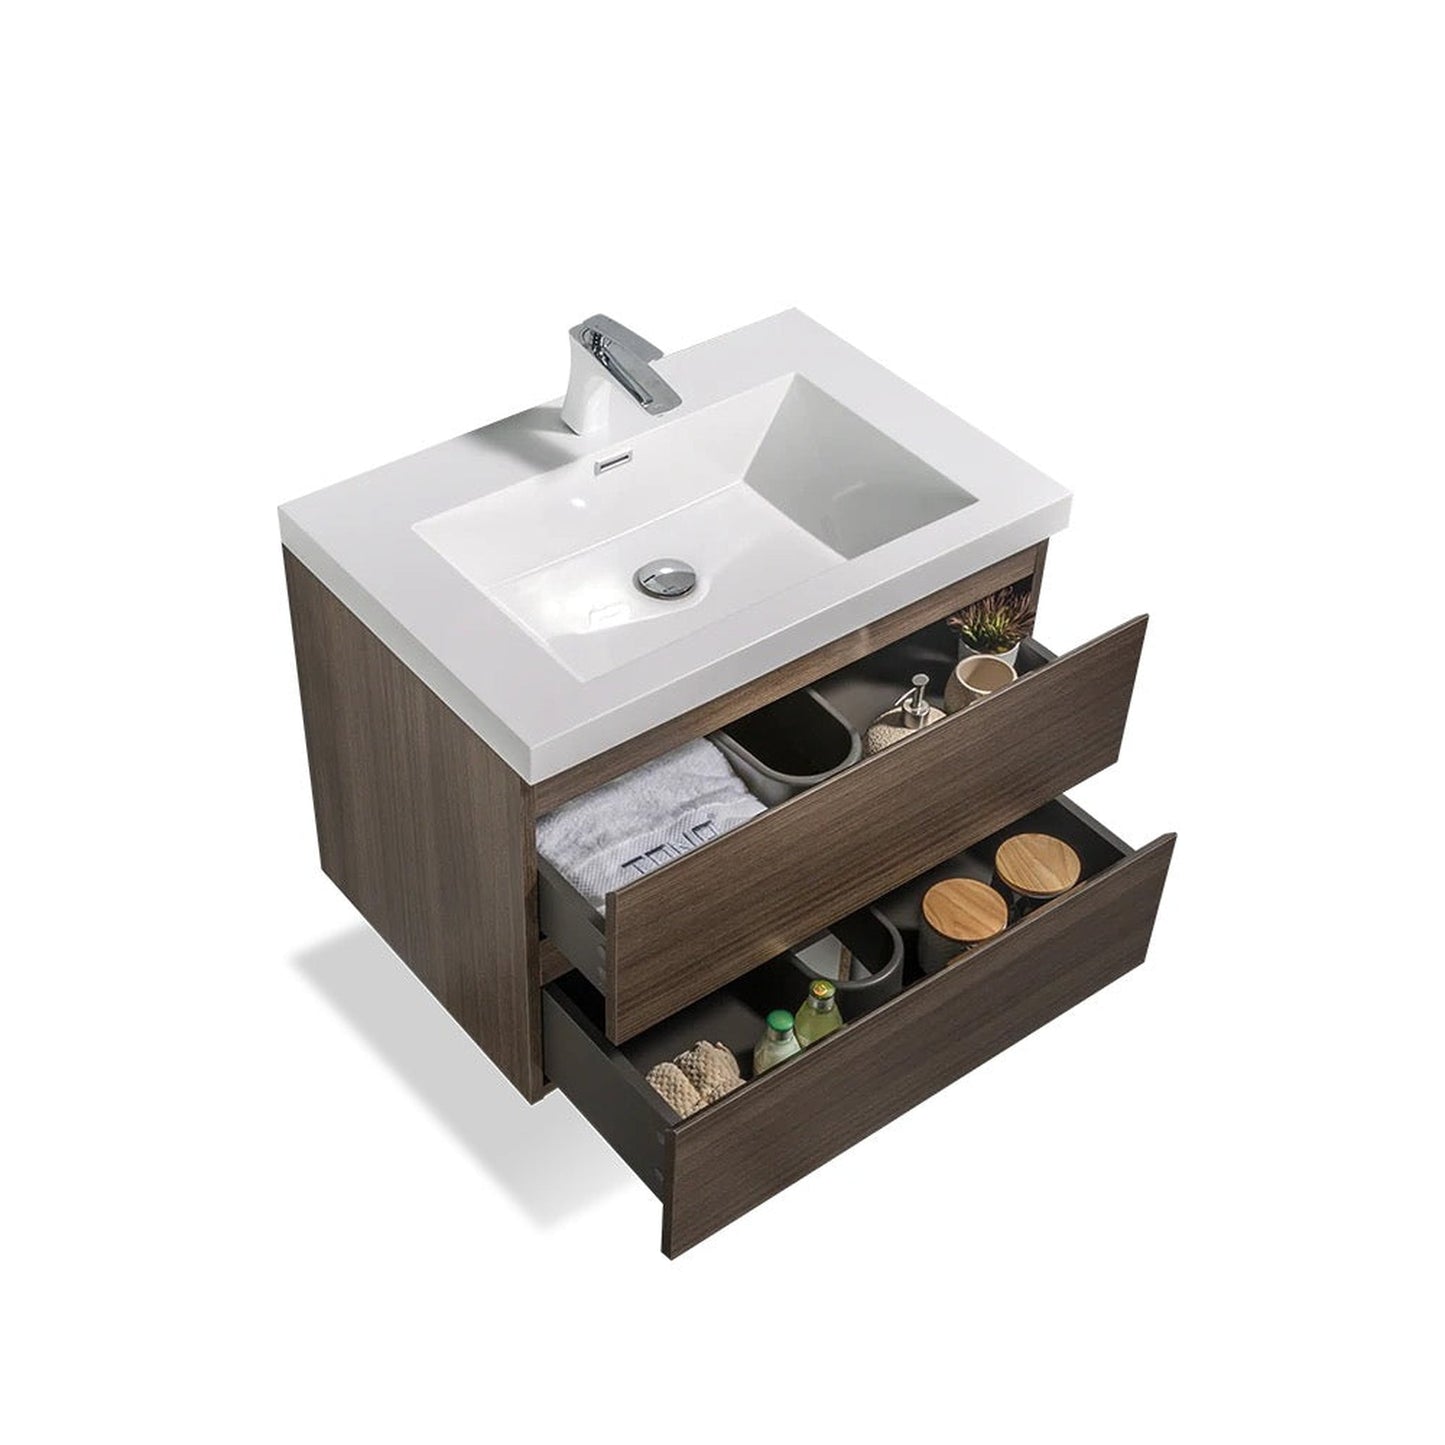 TONA Angela 24" White & Gray Oak Wall-Mounted Bathroom Vanity With Faux Marble Integrated Top & Single Sink